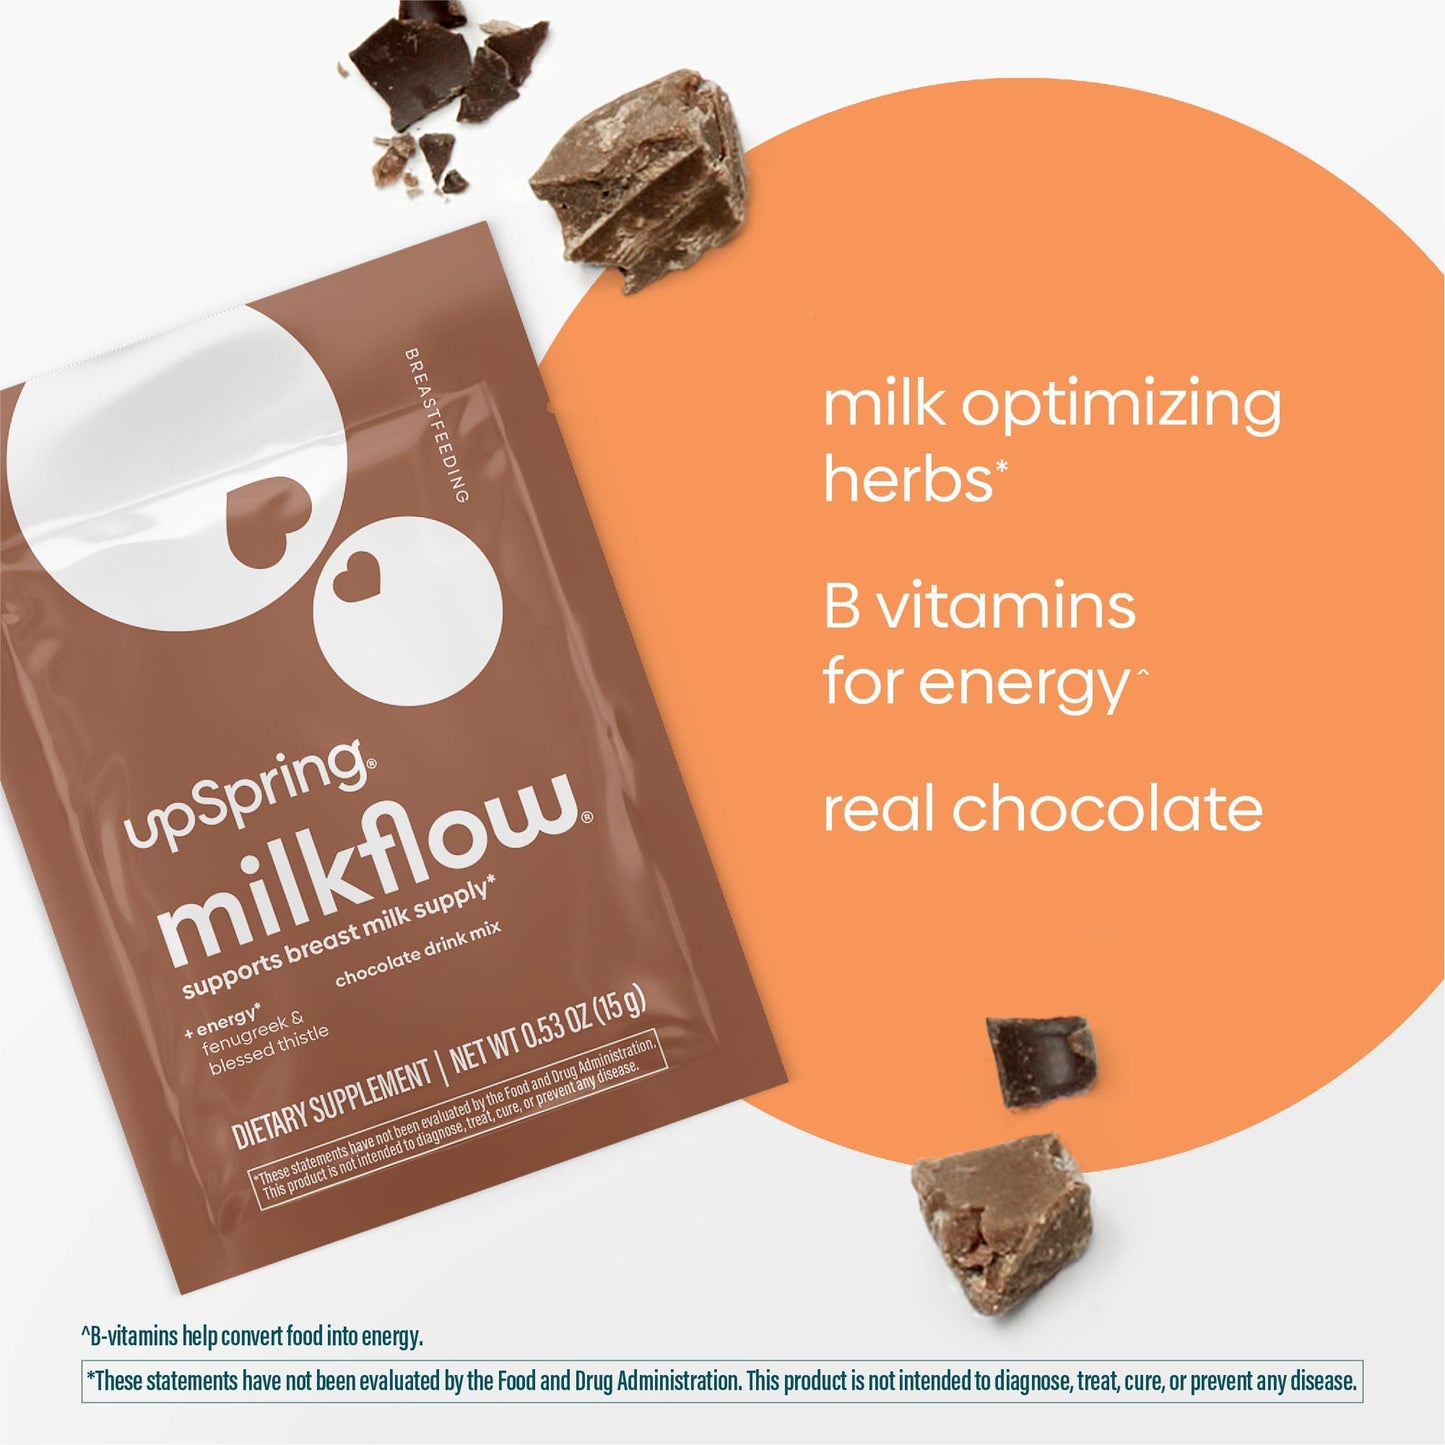 An image of the packet of MilkFlow chocolate which contains real chocolate